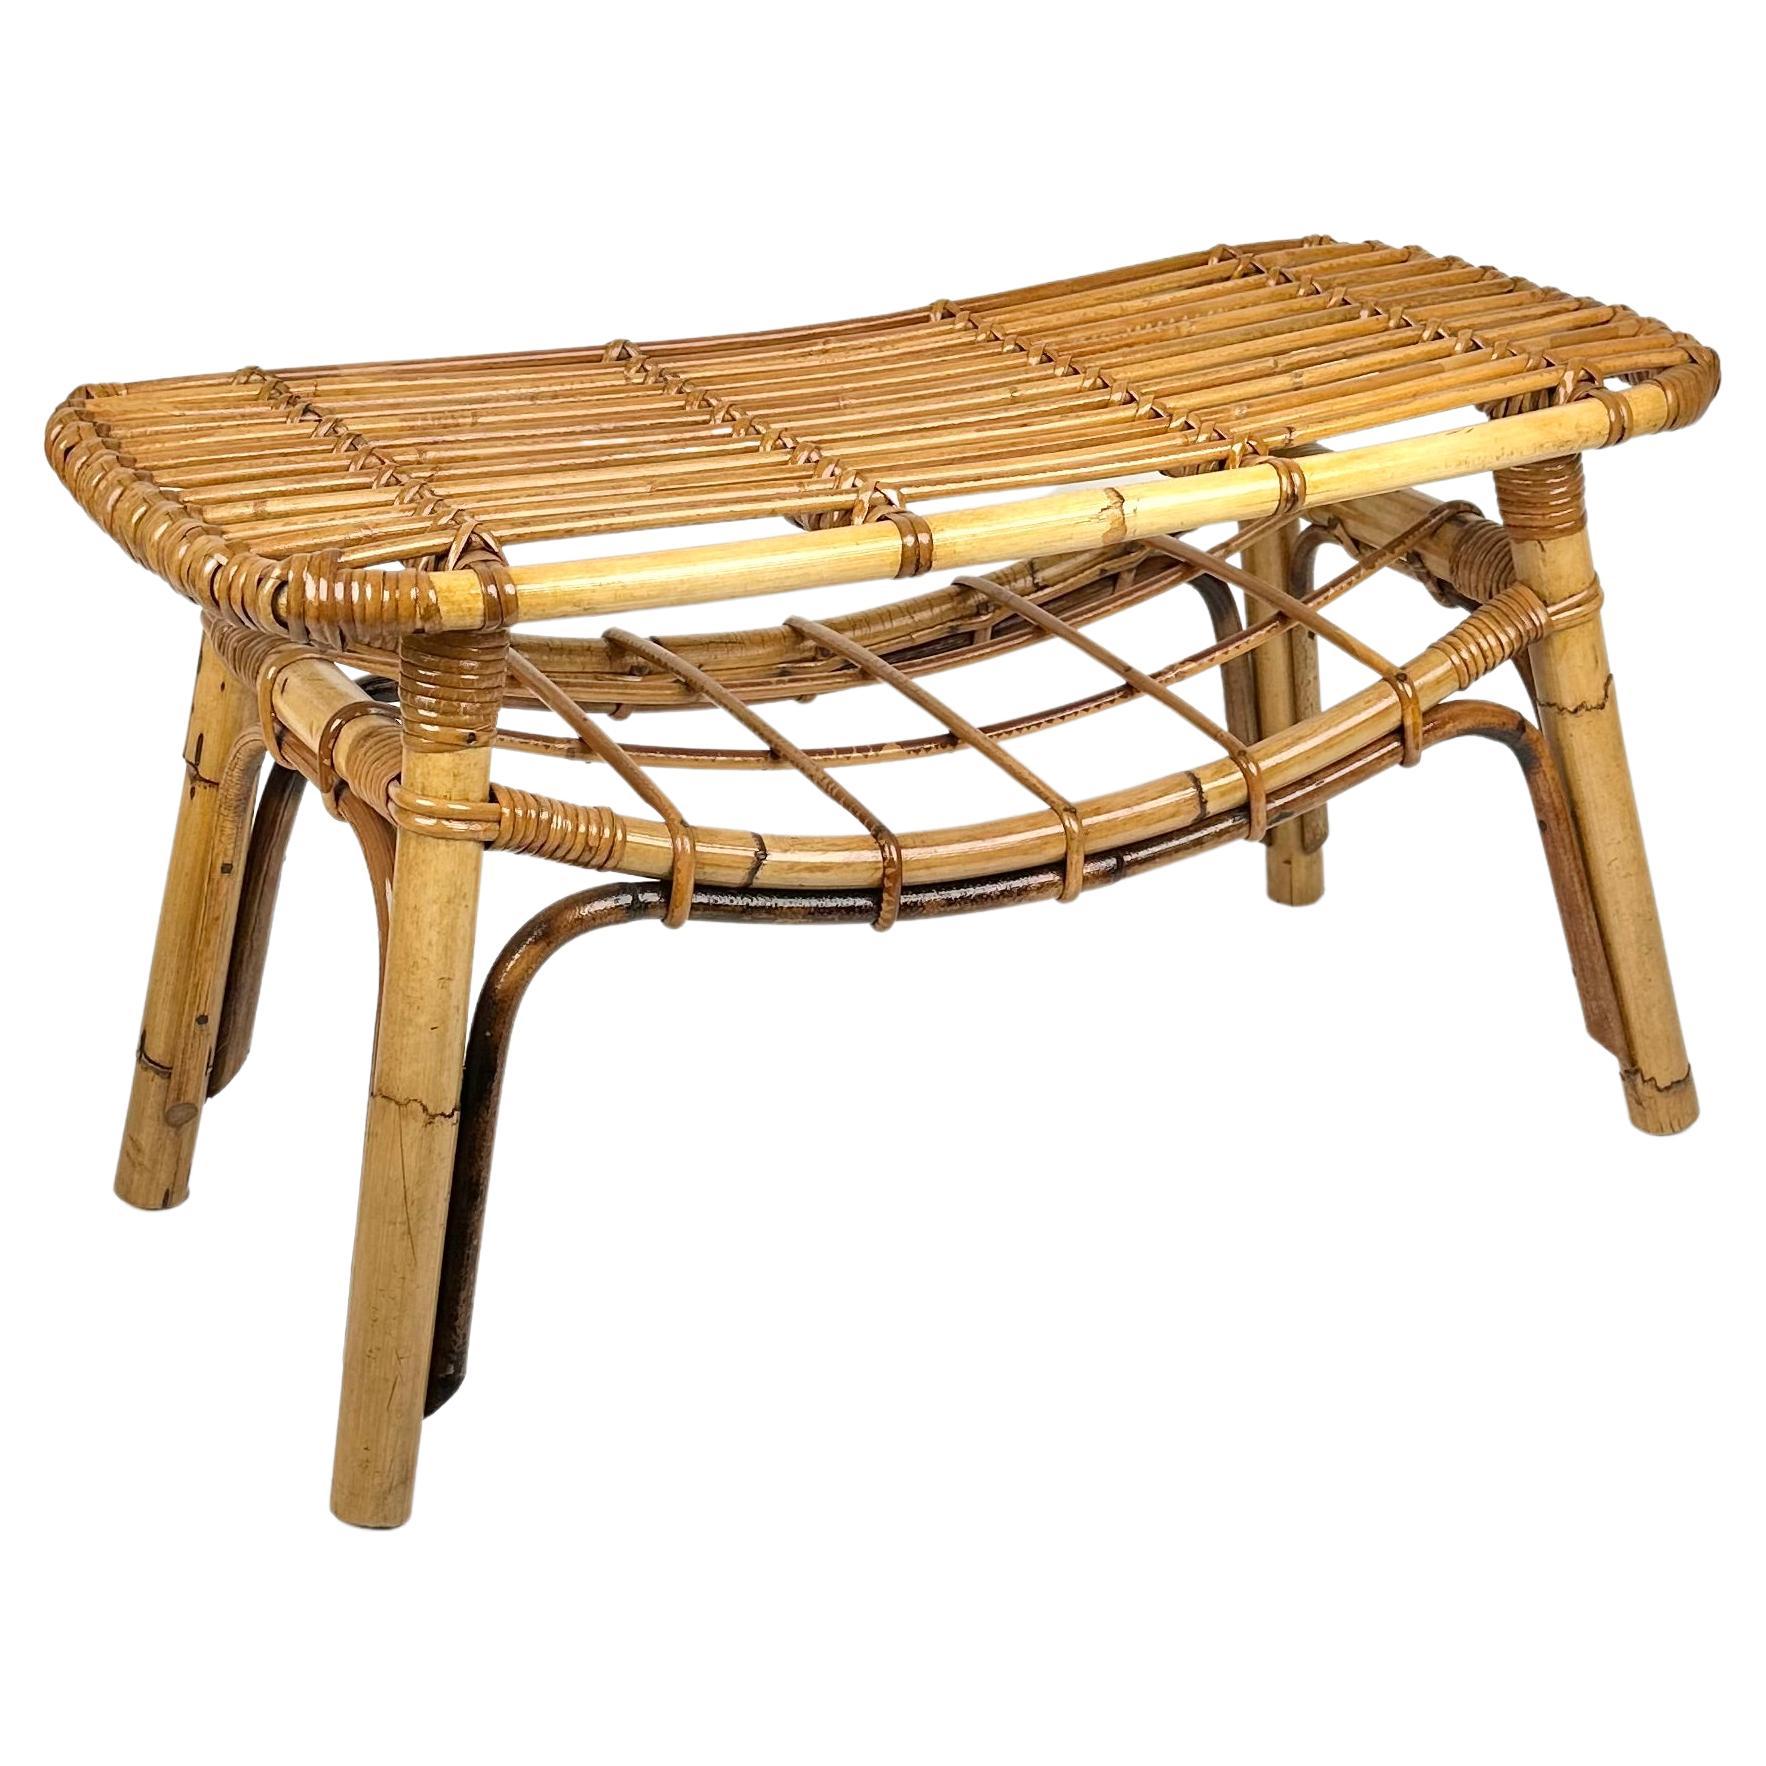 Mid-Century Modern coffee table or stool with magazine rack, perfect in any entry hallway as well as next to a sofa or in any bathroom. Beauty of the woven materials is timeless and classic, making bamboo and rattan furniture incredibly